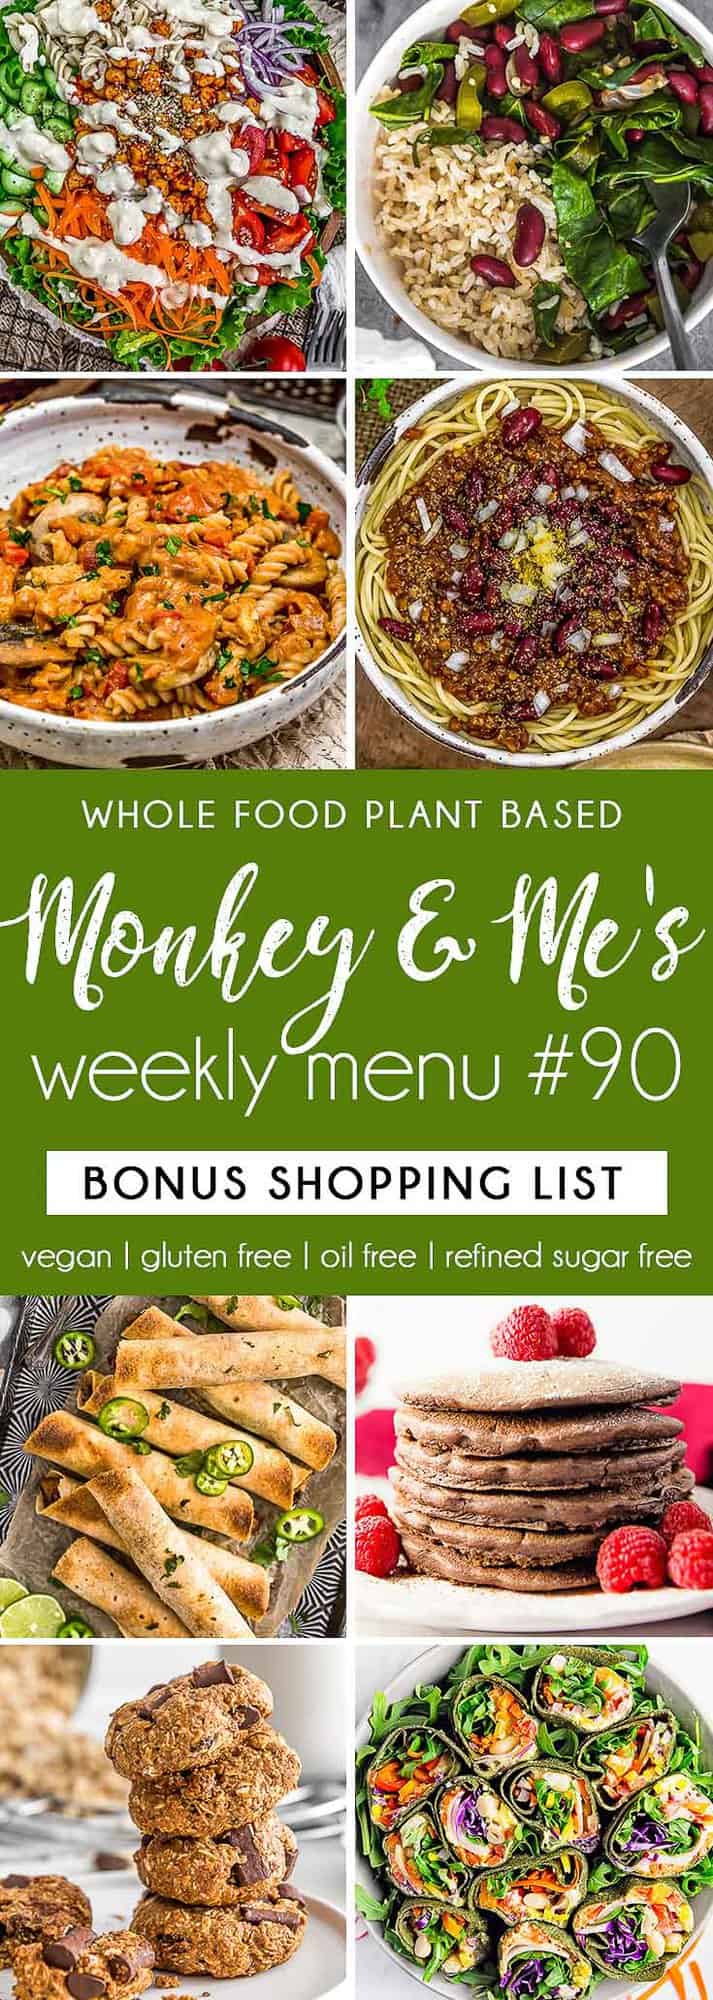 Monkey and Me's Menu 90 featuring 8 recipes